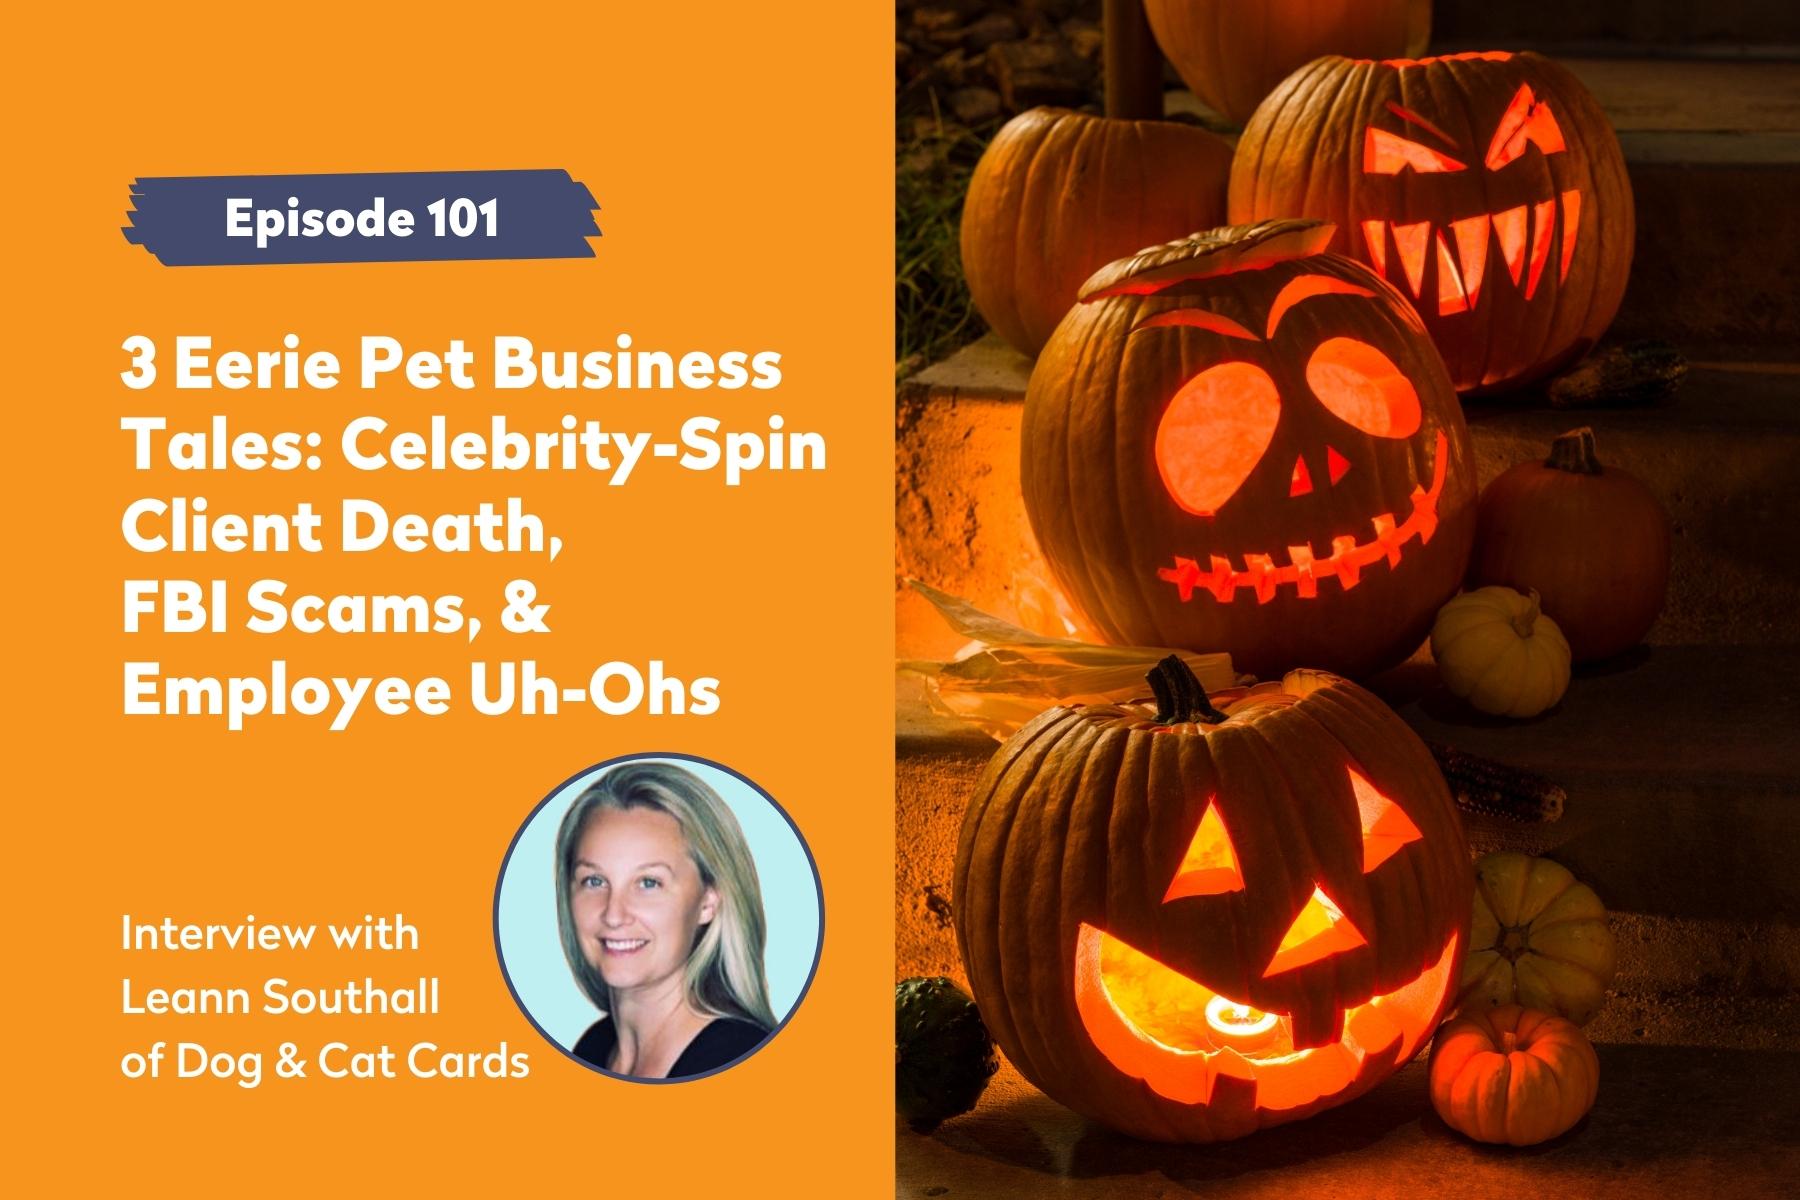 Episode 101 | 3 Eerie Pet Business Tales: Celebrity-Spin Client Death, FBI Scams, & Employee Uh-Ohs